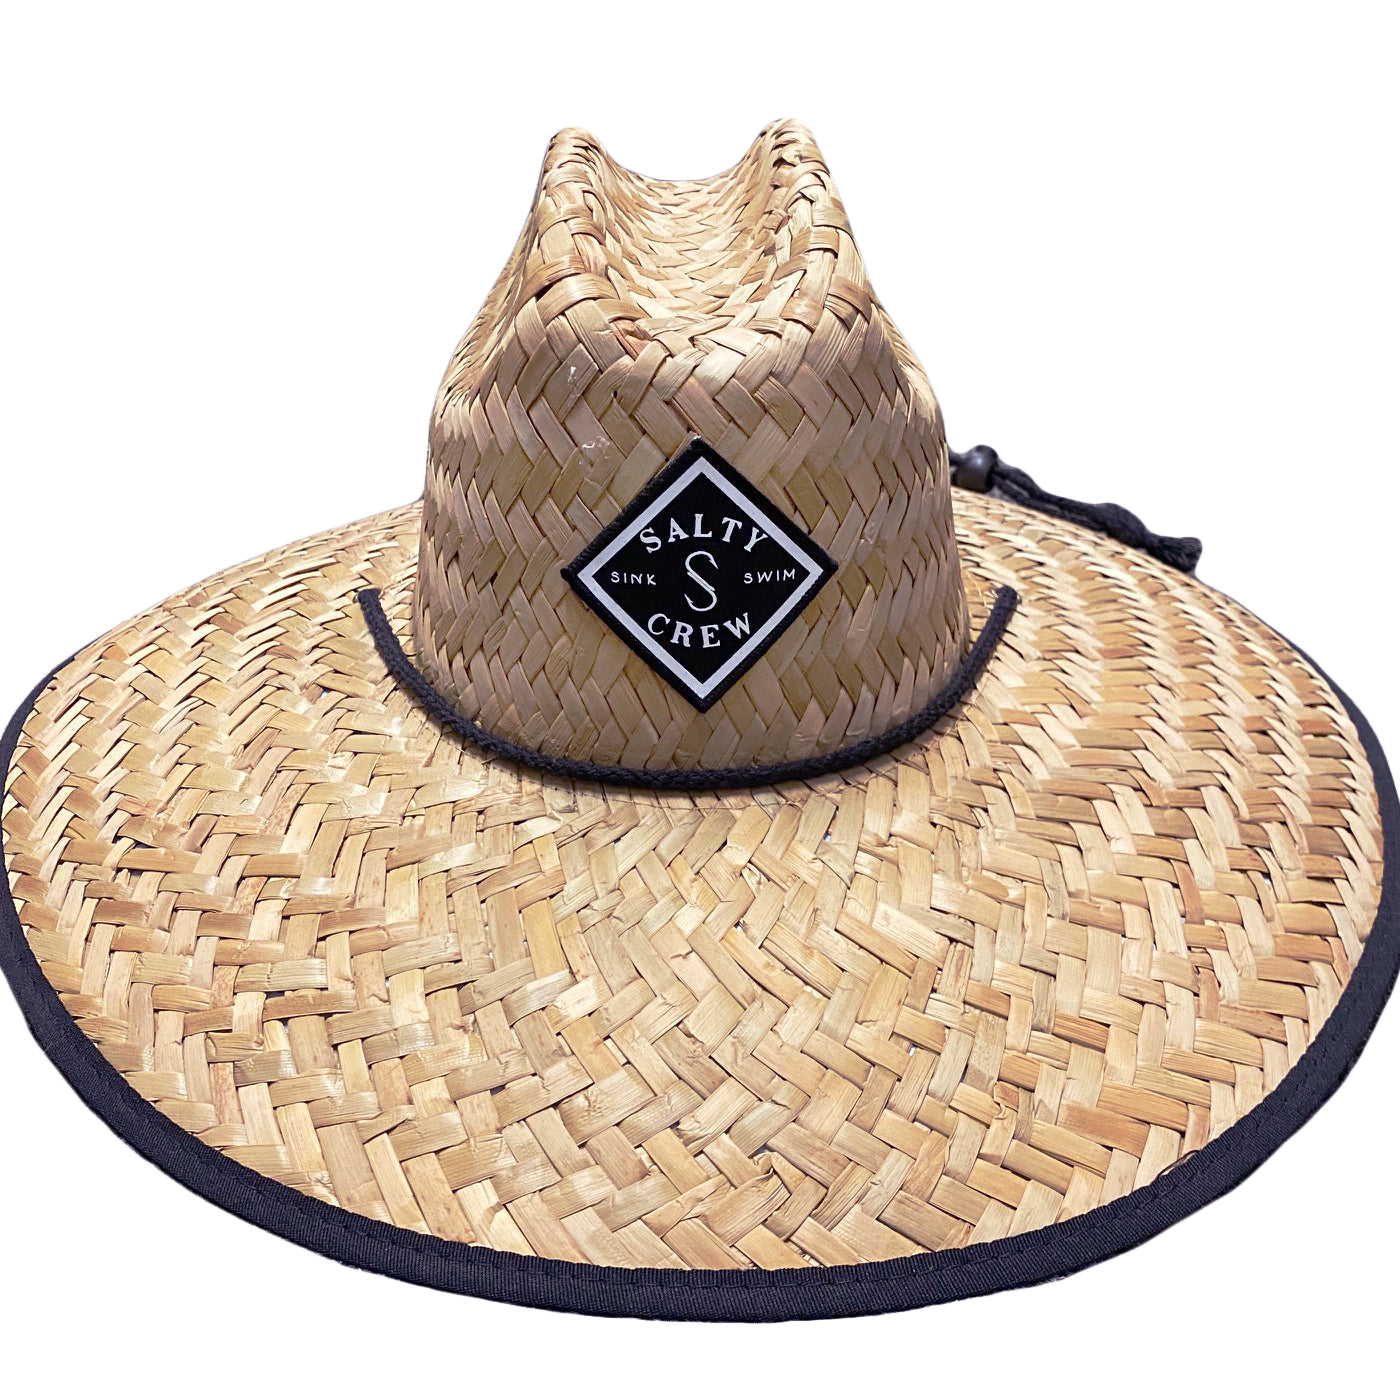 Salty Crew Tippet Coverup Straw Hat  Navy OS